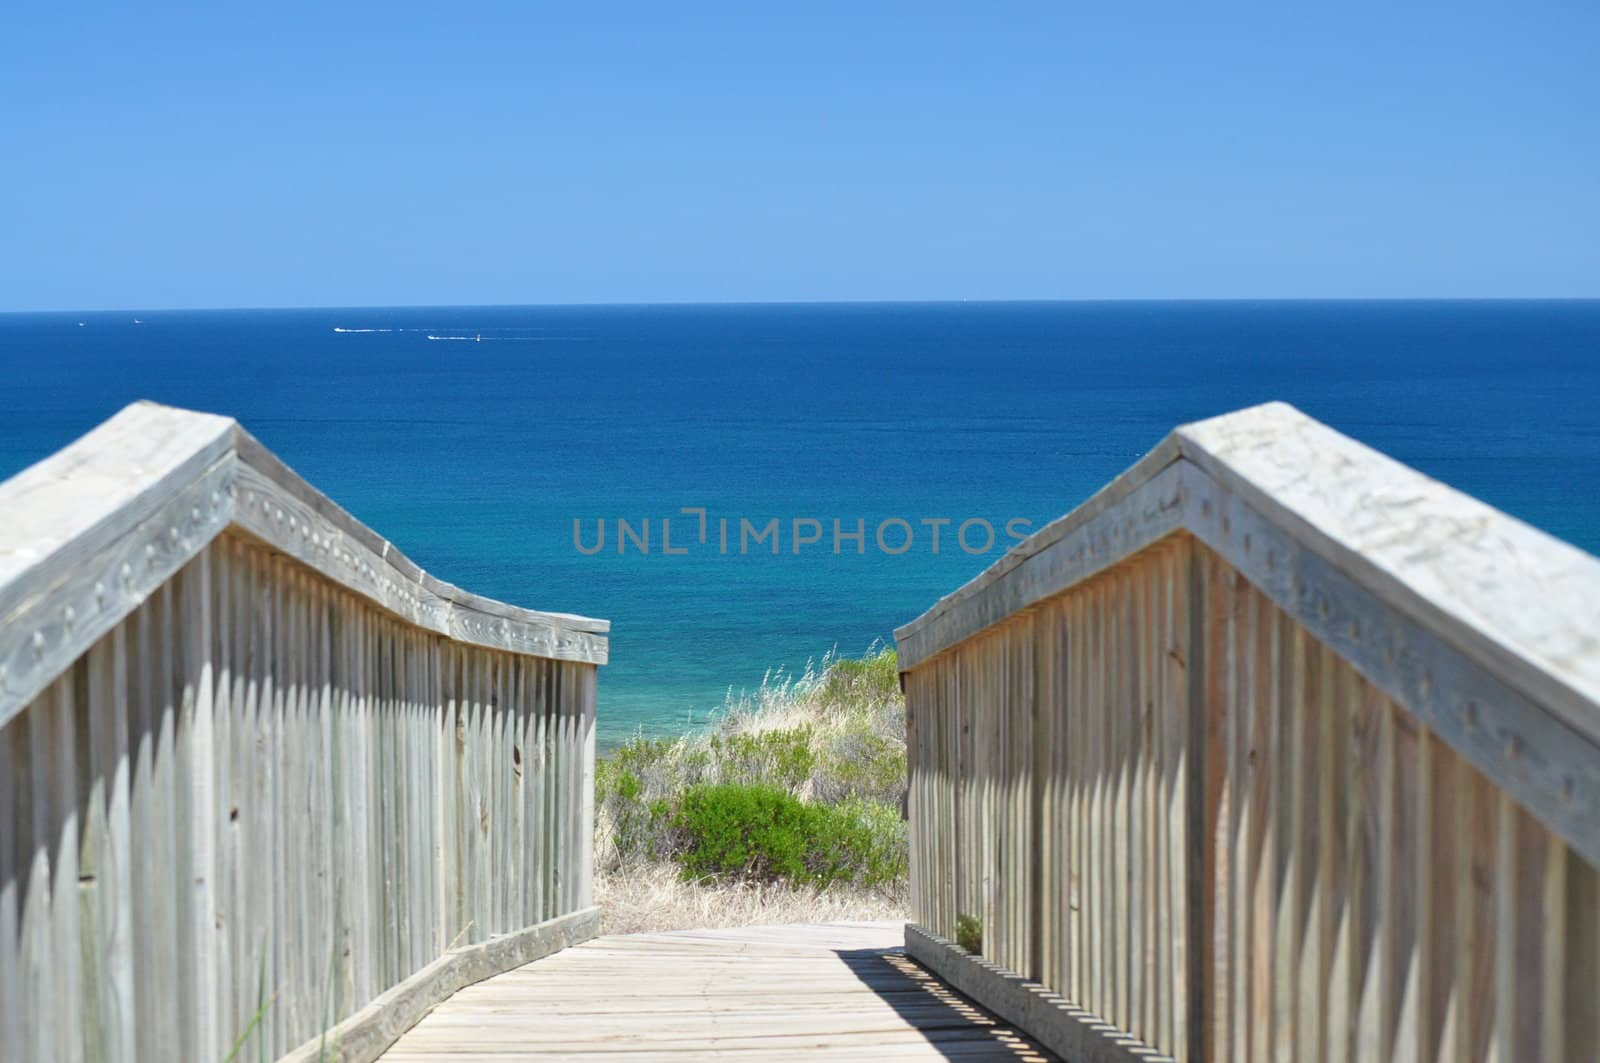 Touristic footpath and amazing blue ocean water view. Hallett Cove, South Australia